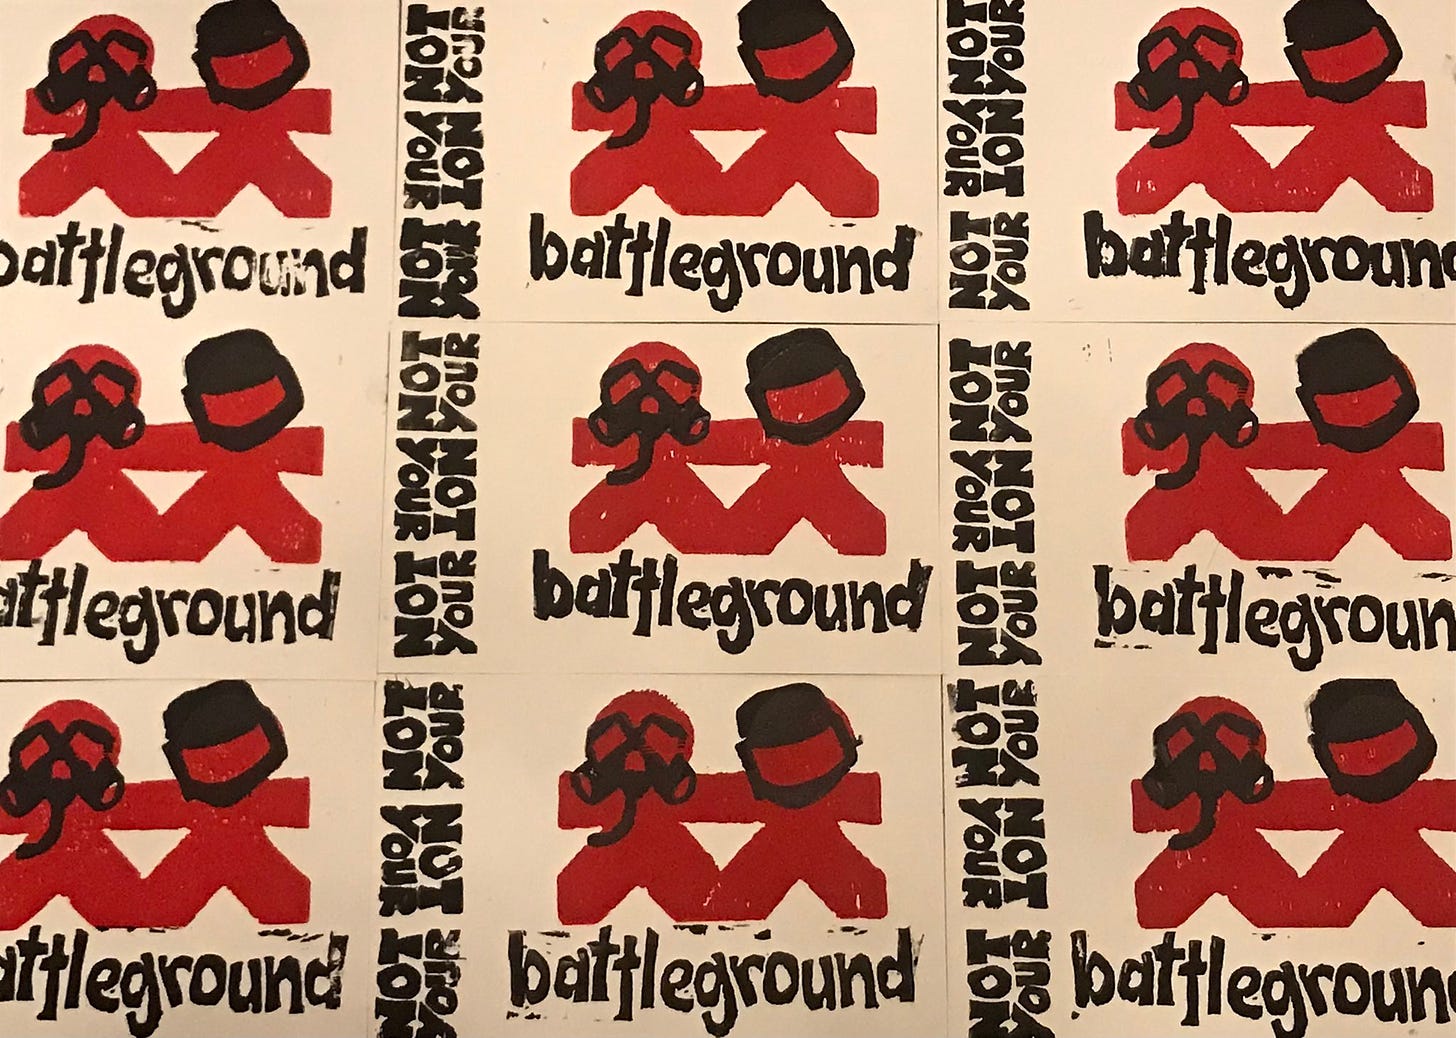 Several prints from an edition of block prints by Anna Caudill. Print features a variation on Vanderbilt Children’s Hospital logo, in which 2 red figures representing children are clad with black bomb helmet & gas mask. Black text along the side and bottom of the figures reads “Not your Not your Not your battleground”.